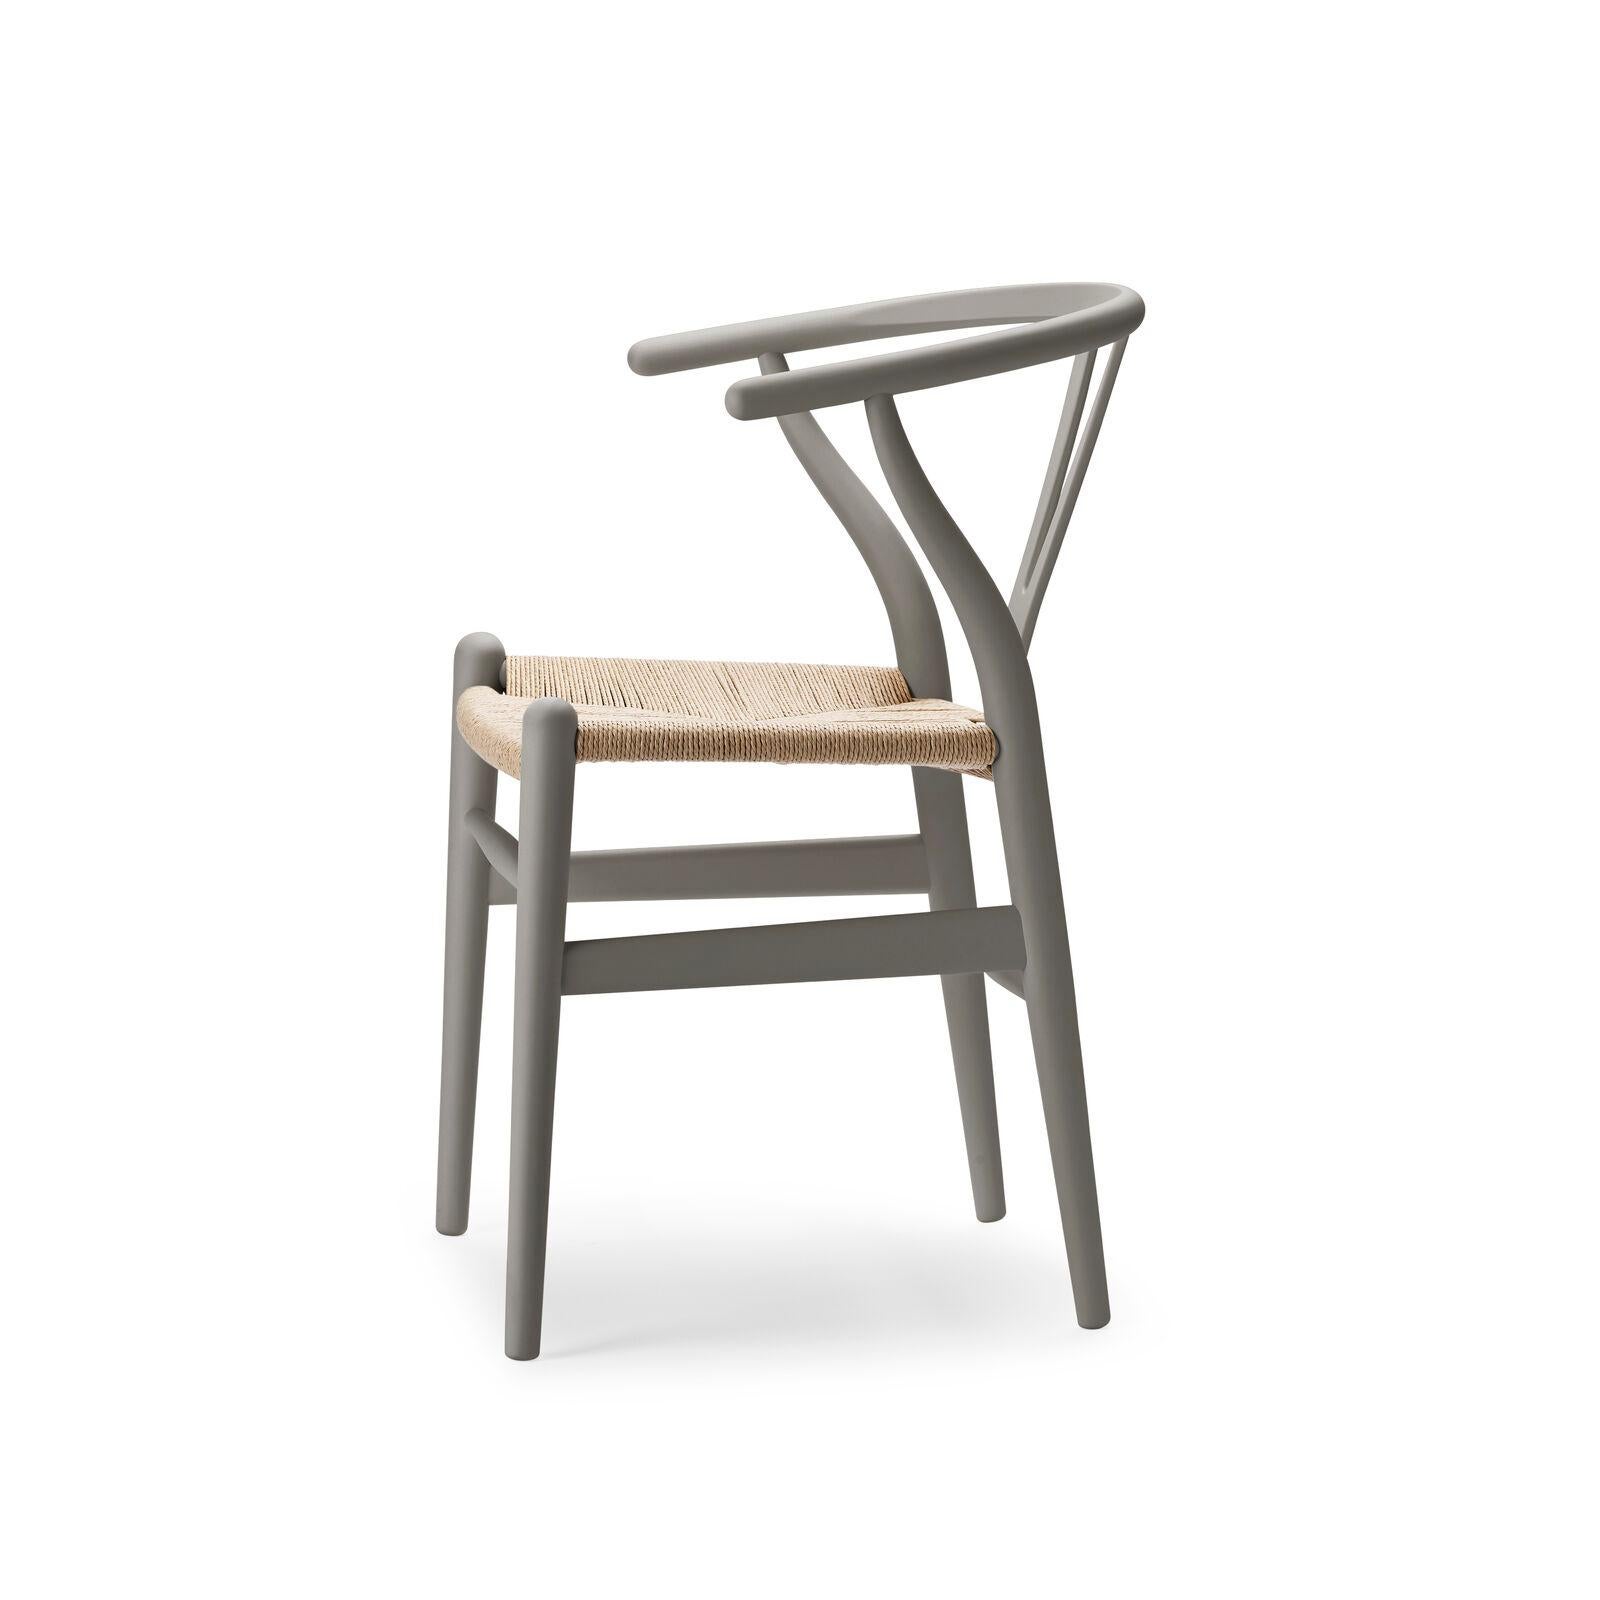 To celebrate more than 70 years of collaboration between Carl Hansen & Søn and Hans J. Wegner, designer Ilse Crawford reinterprets the CH24 Wishbone Chair in a palette of nine soft yet complex colours.